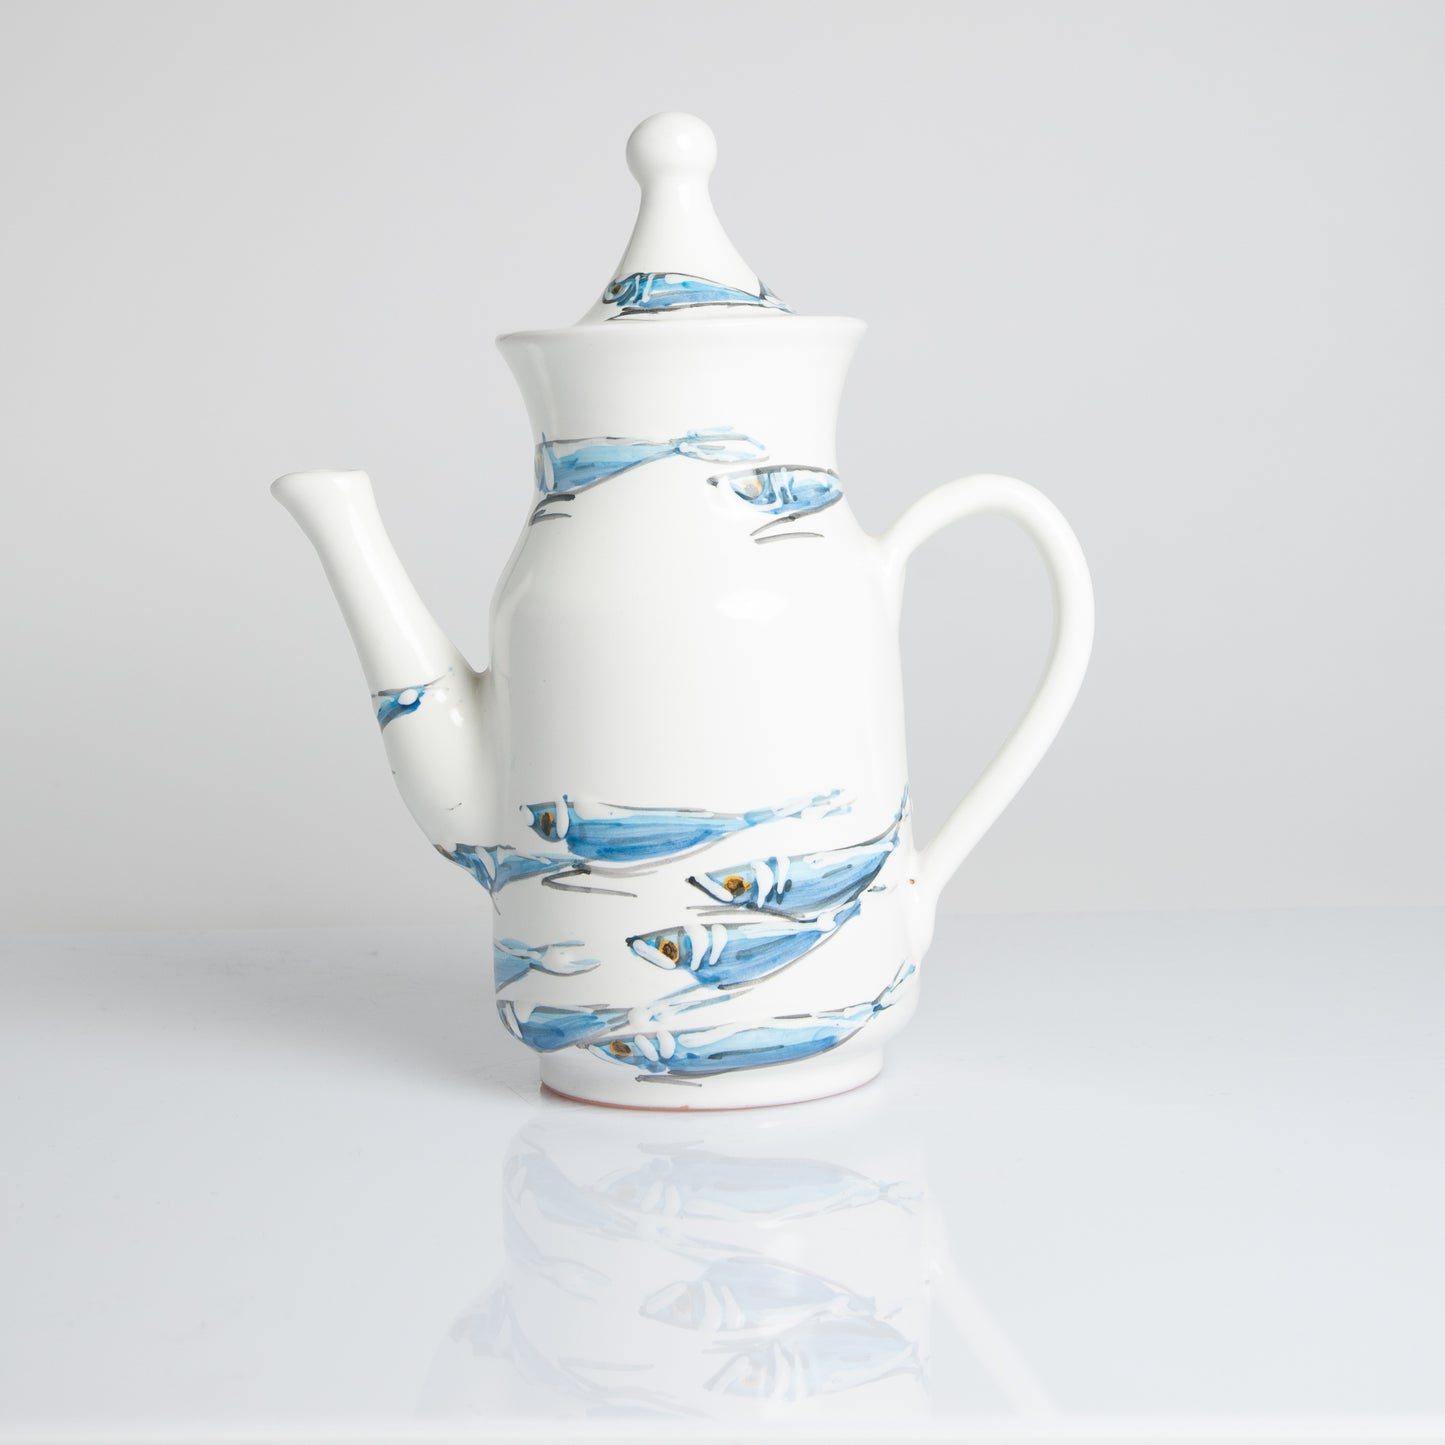 Anchovies teapot